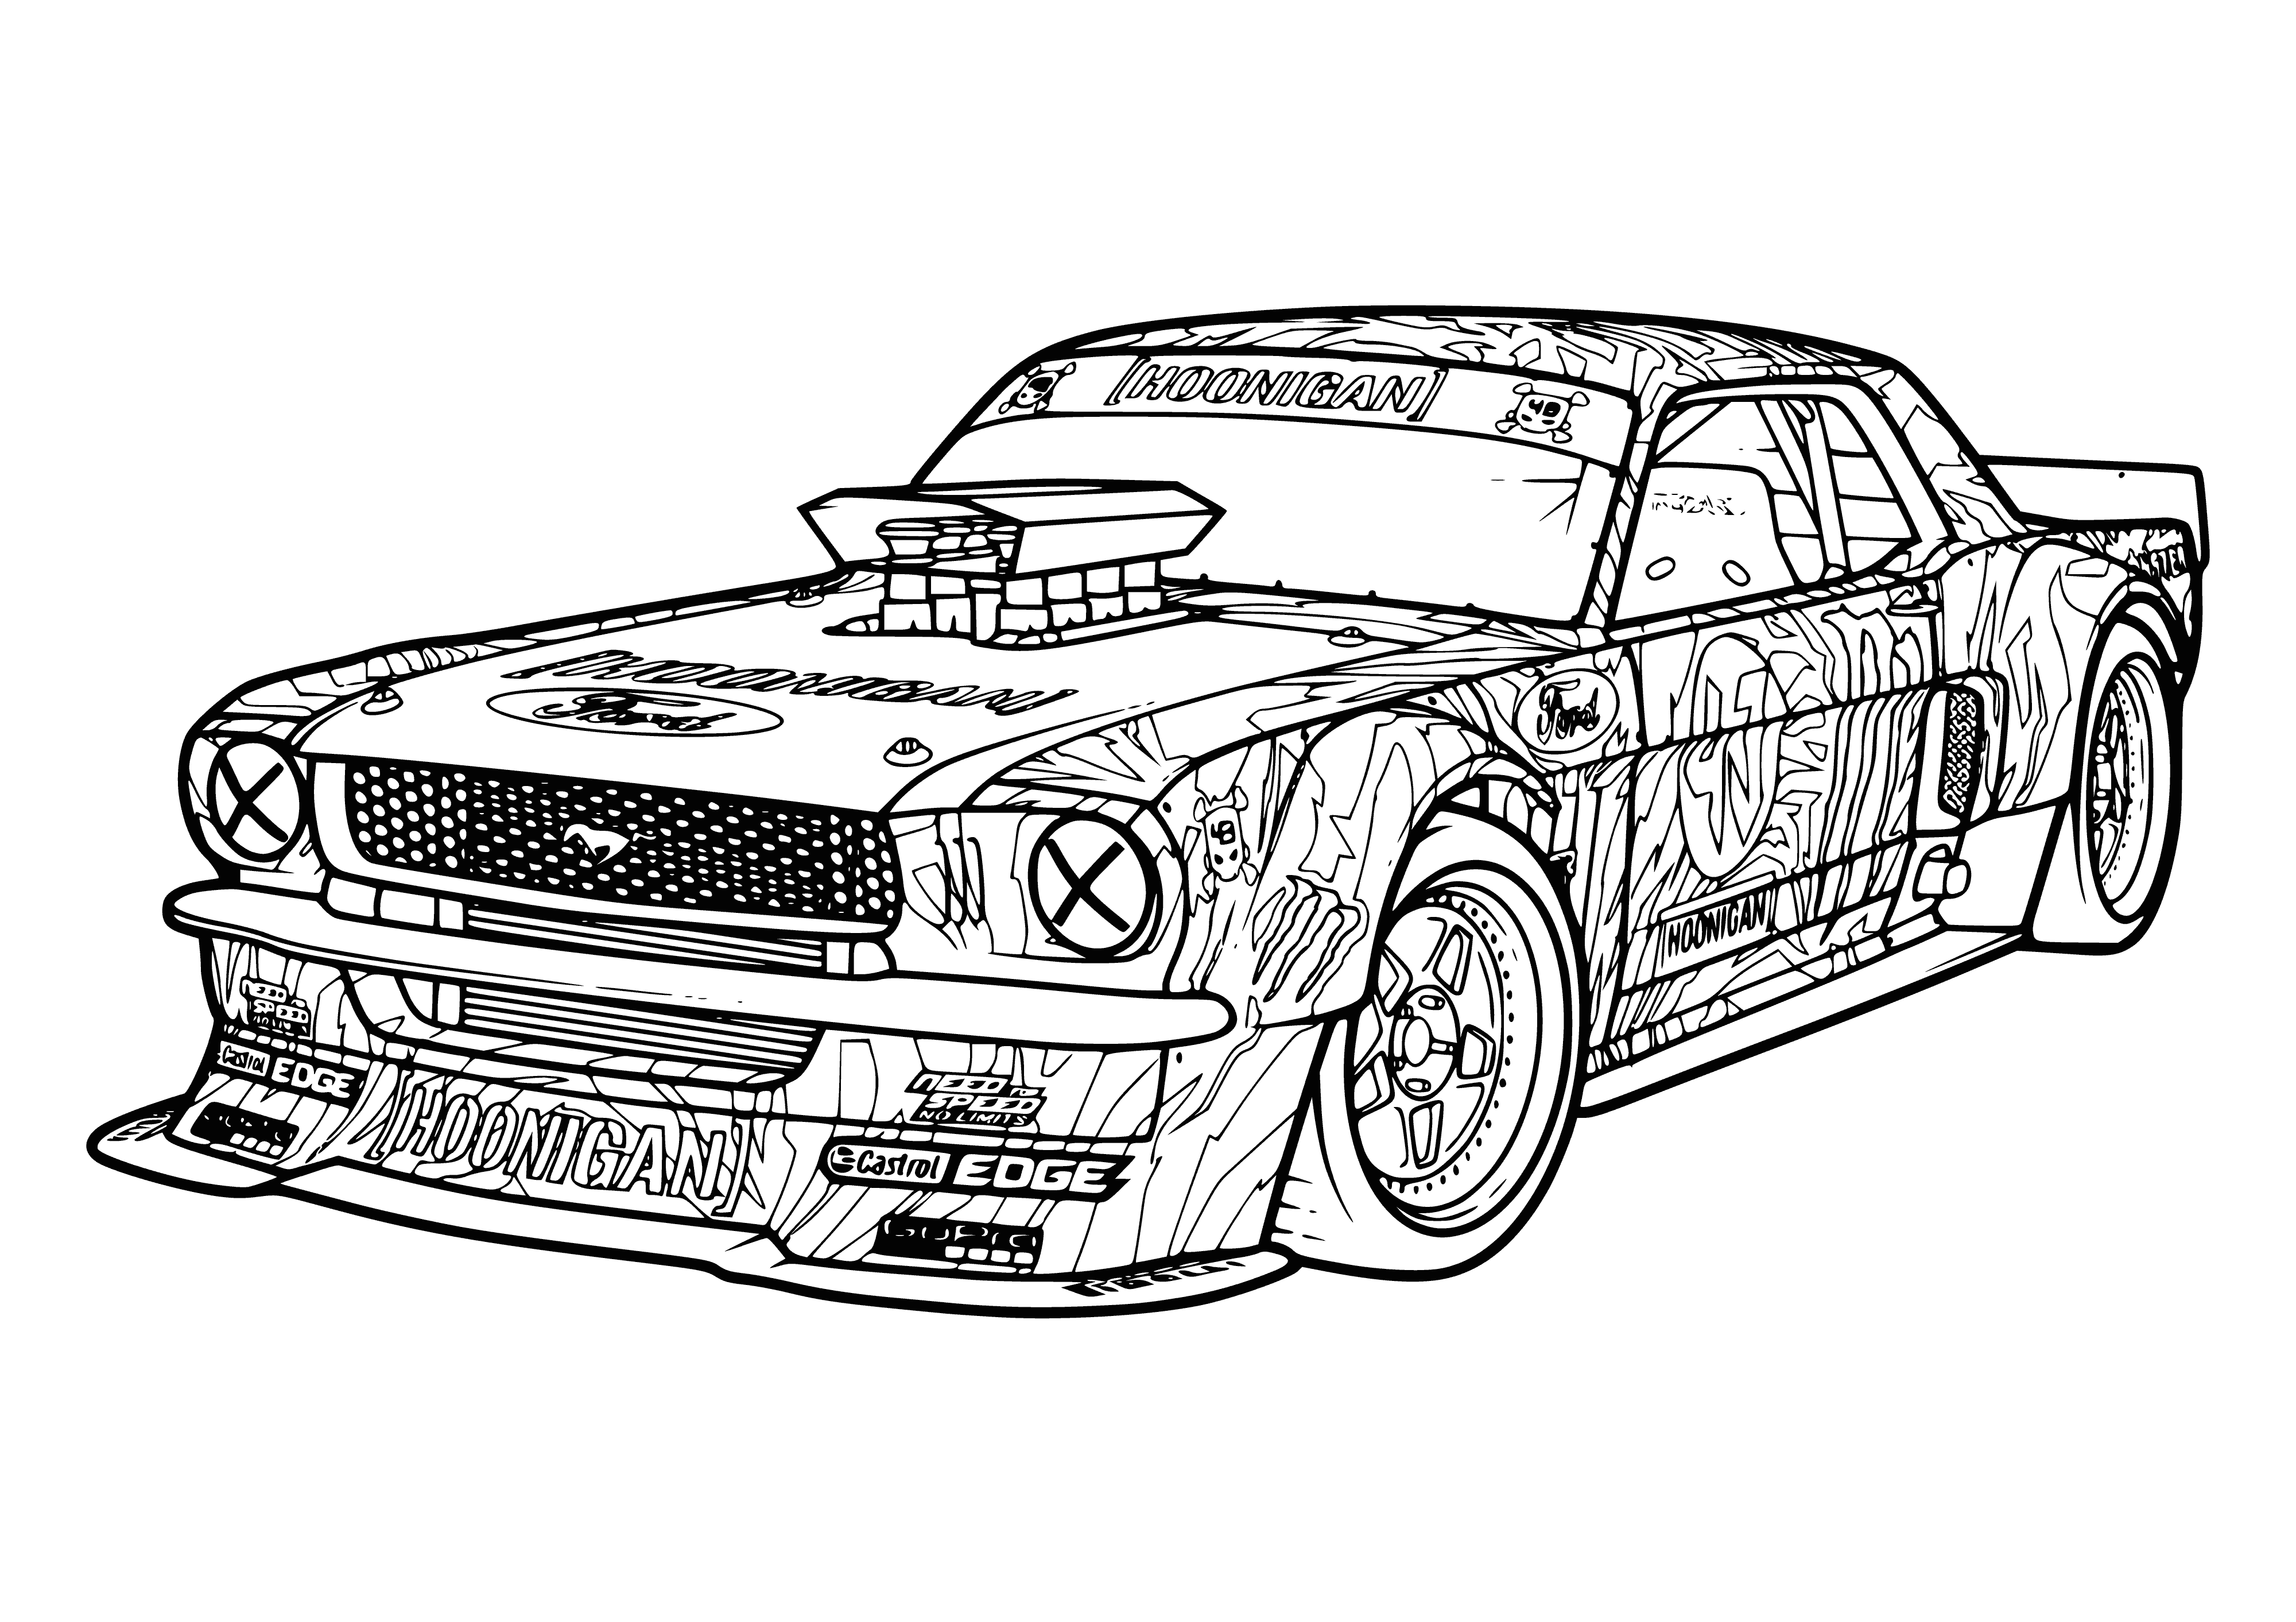 coloring page: Car parked: red Mustang w/ two doors, long hood, two white stripes, four wheels & dark top.